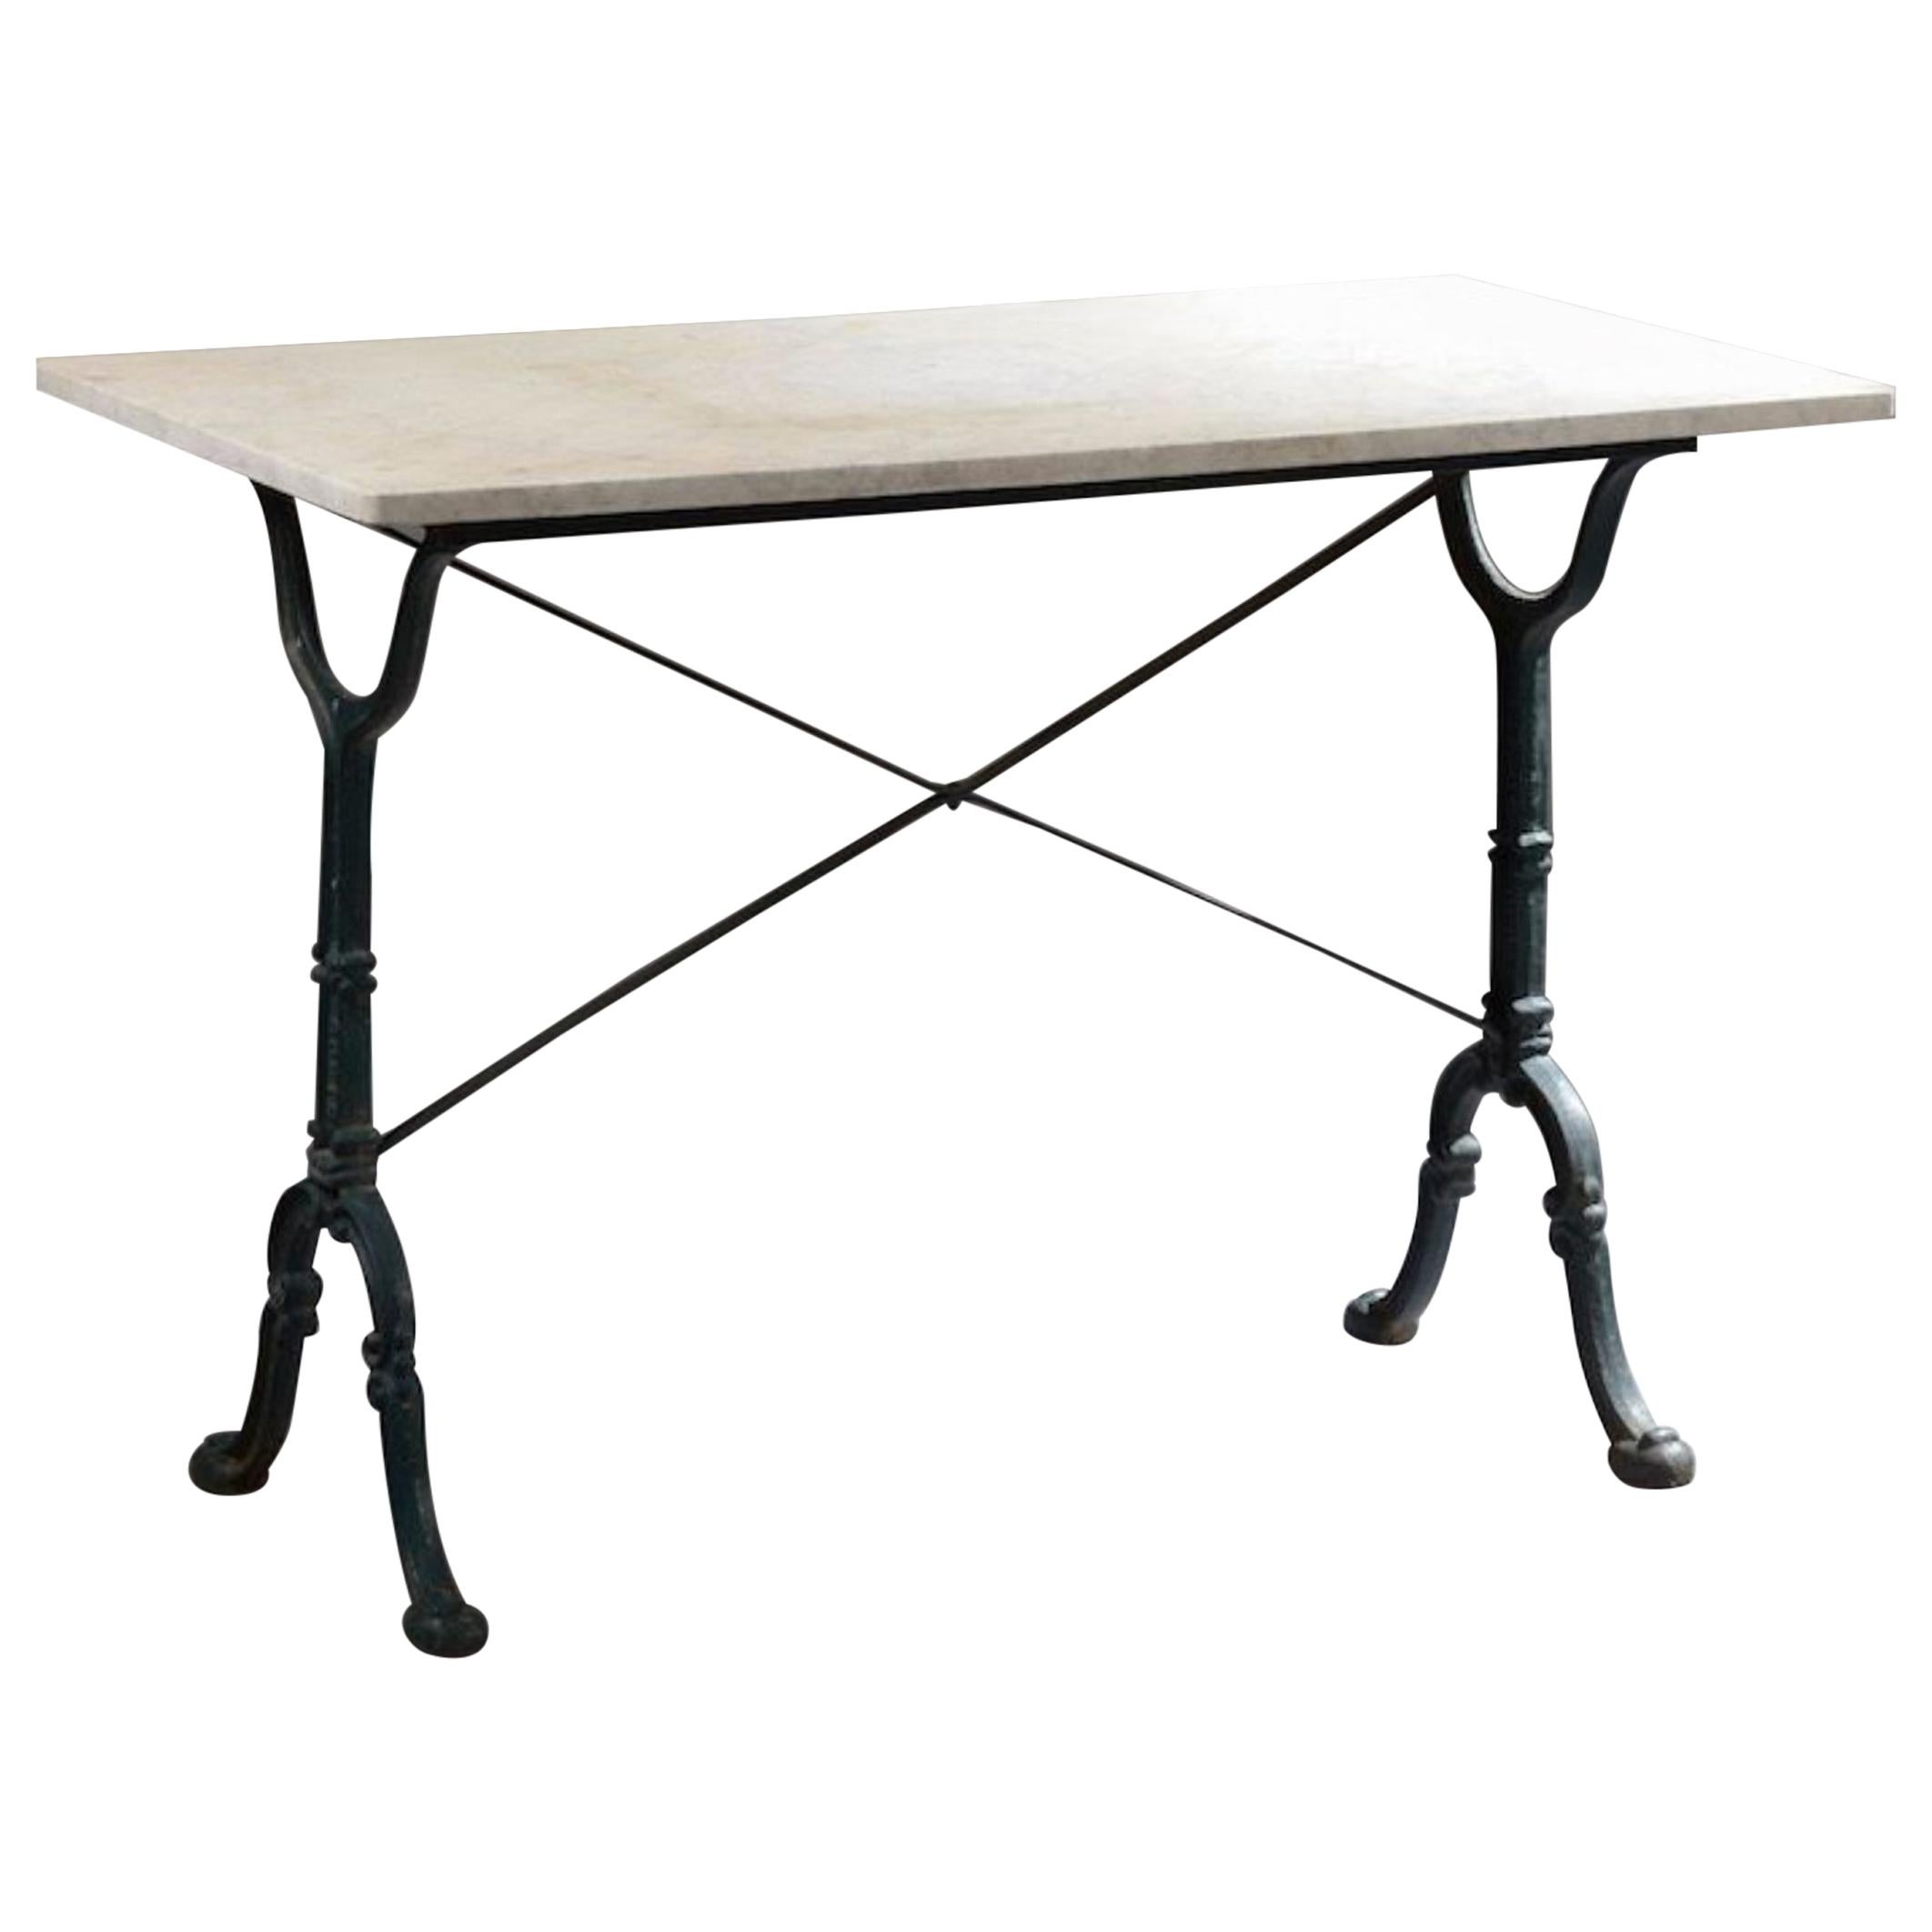 20th Century French Cast Iron Estaminet Table with White Marble Top